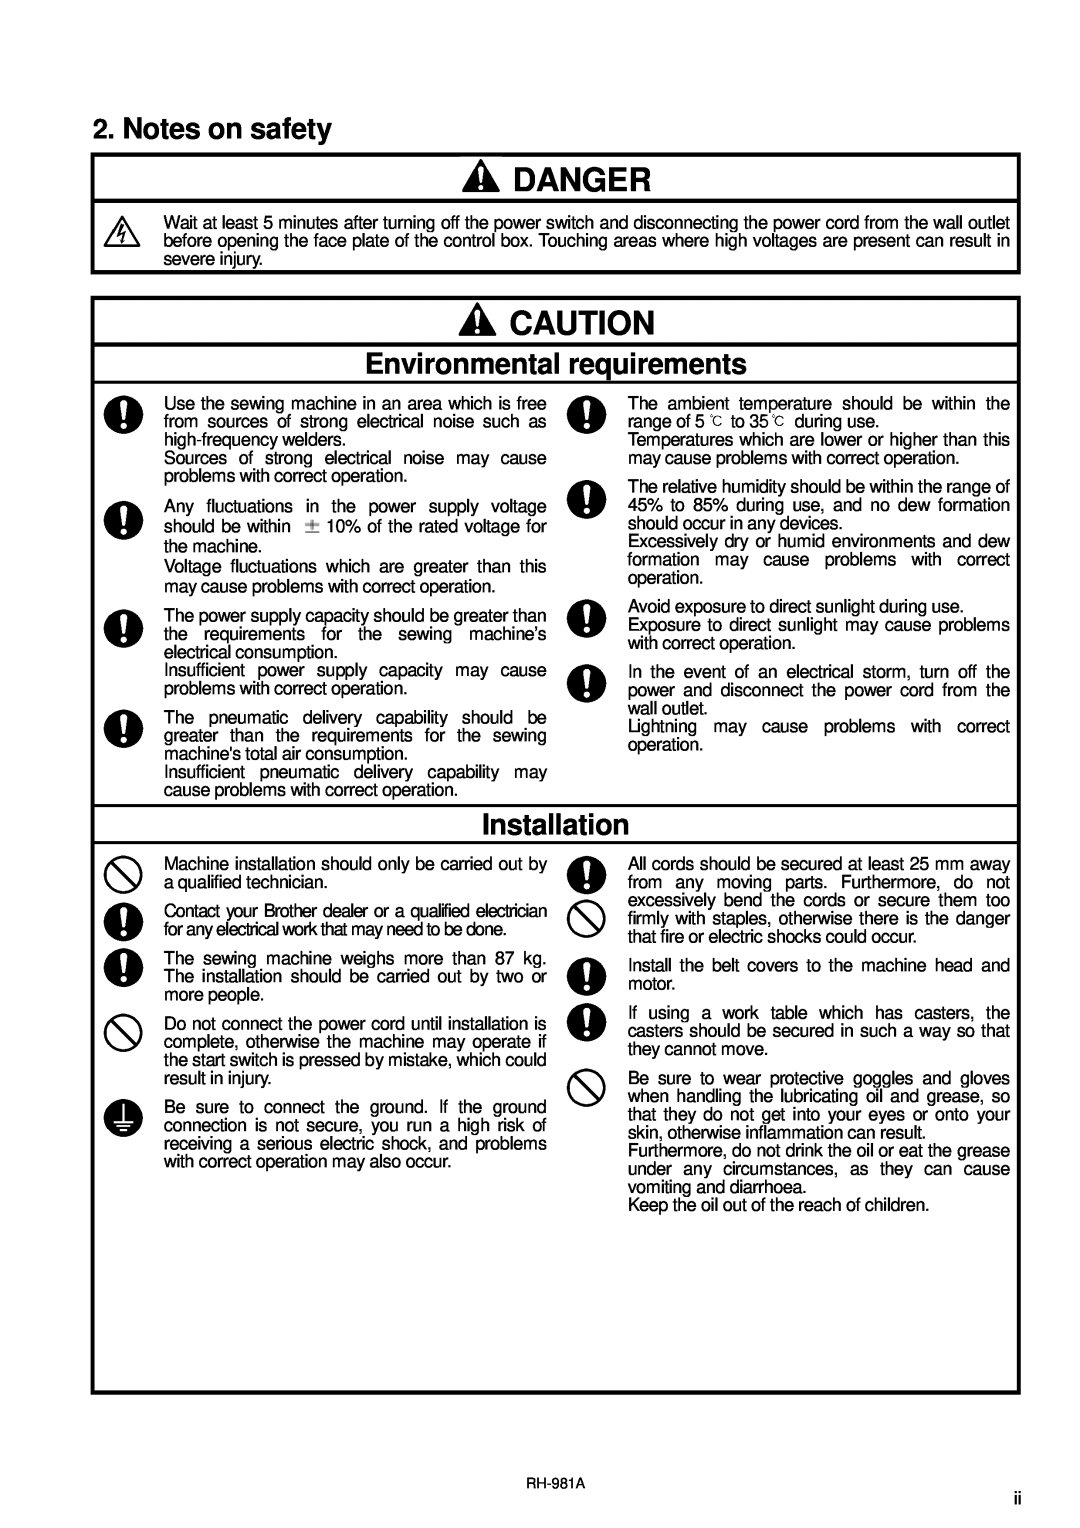 Brother rh-918a manual Danger, Notes on safety, Environmental requirements, Installation 